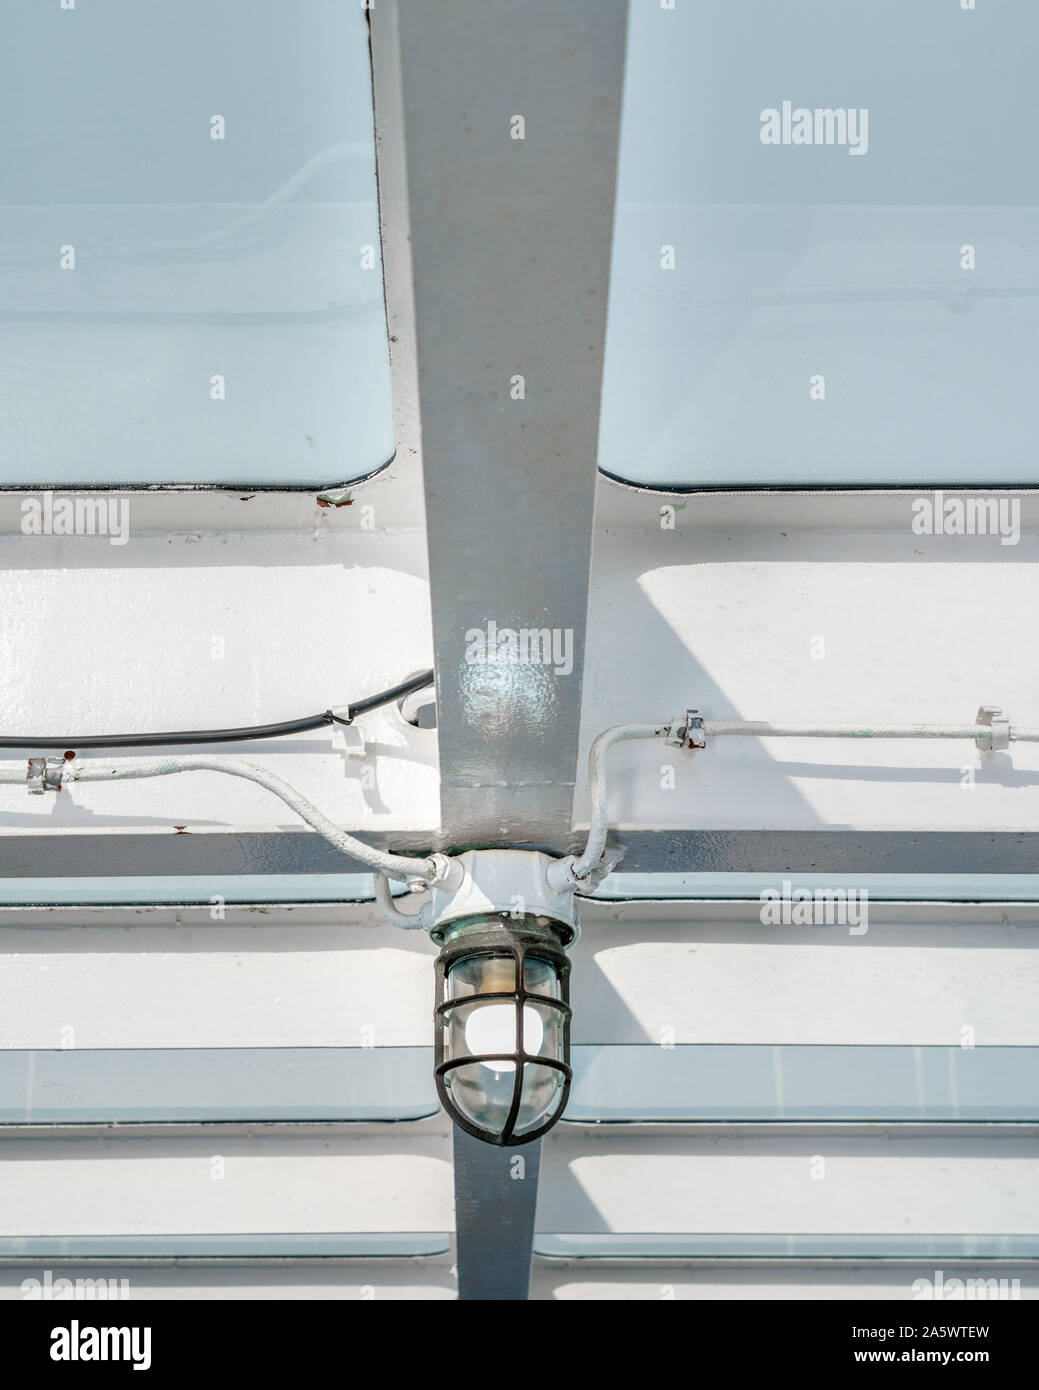 Detail of marine light fixture from underneath, attached to painted white metal beams aboard a ship with view of pale blue sky through ceiling panels. Stock Photo